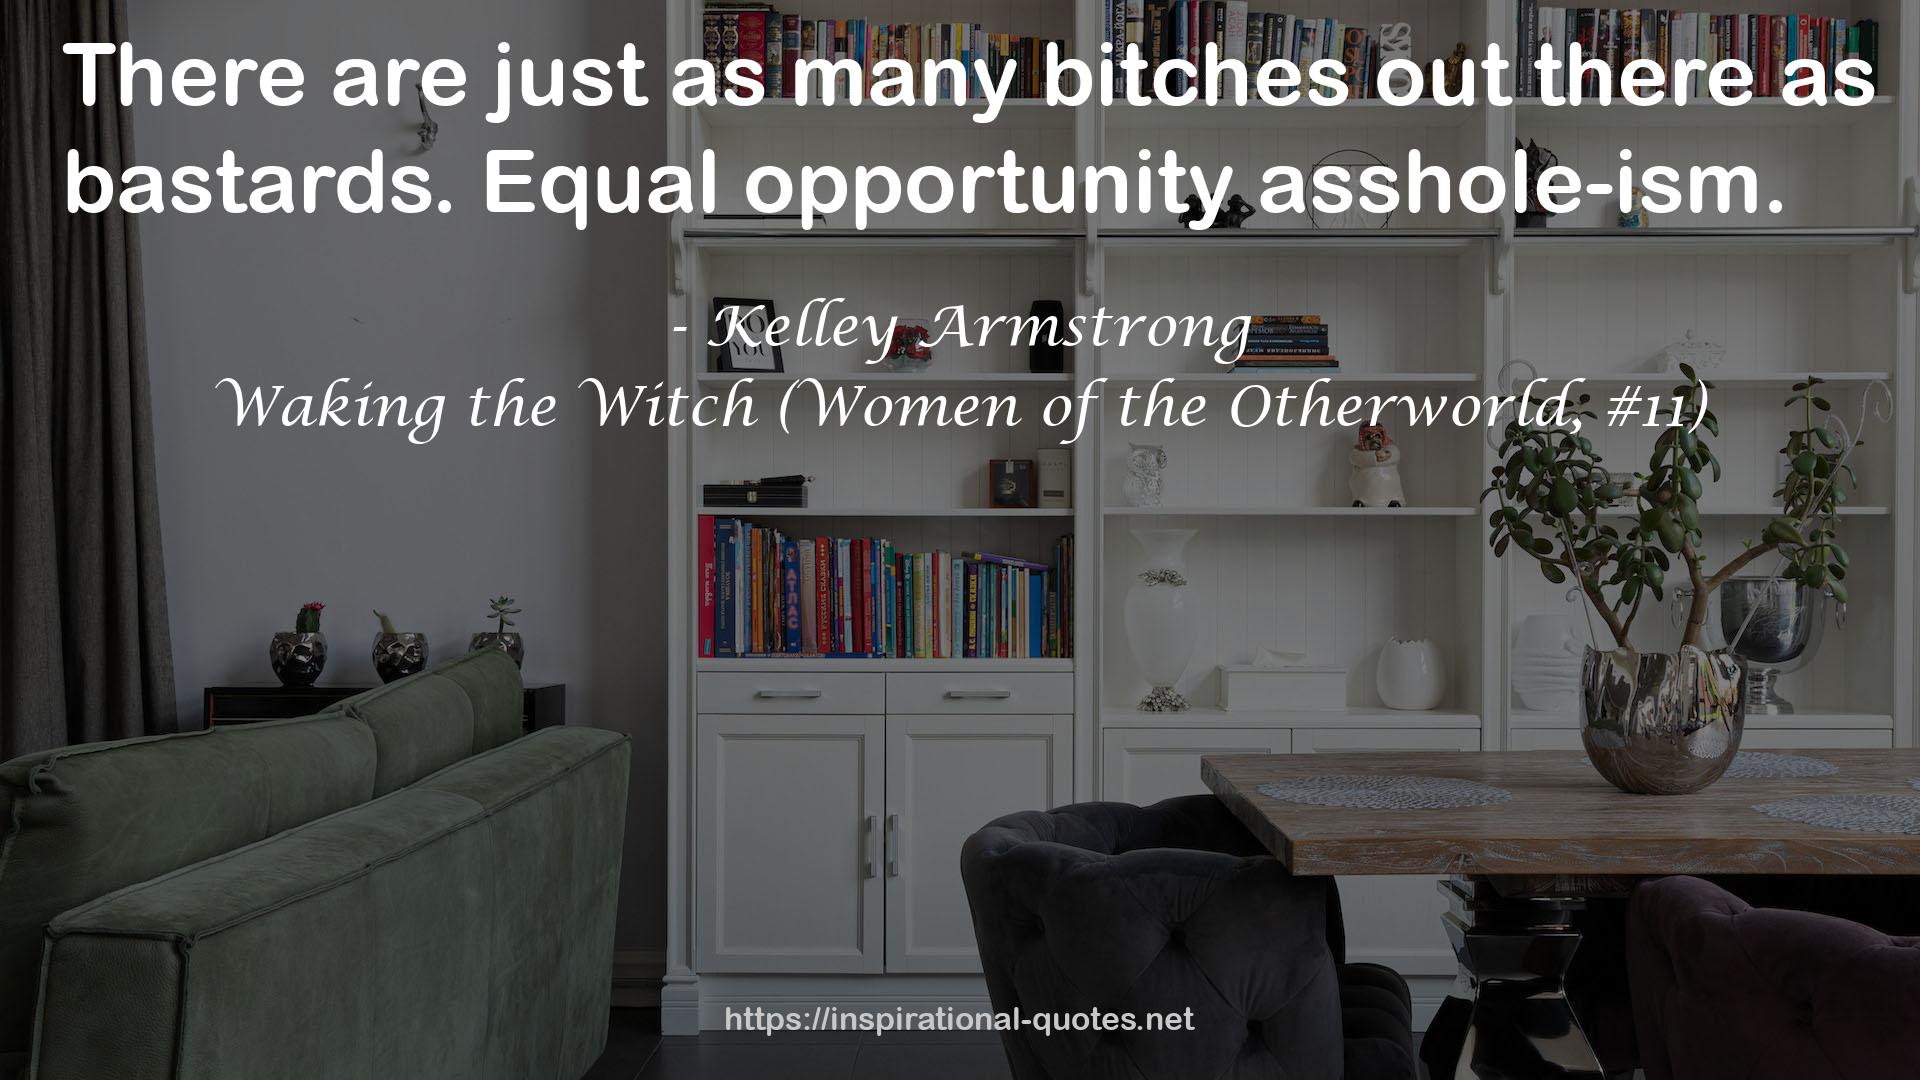 Waking the Witch (Women of the Otherworld, #11) QUOTES